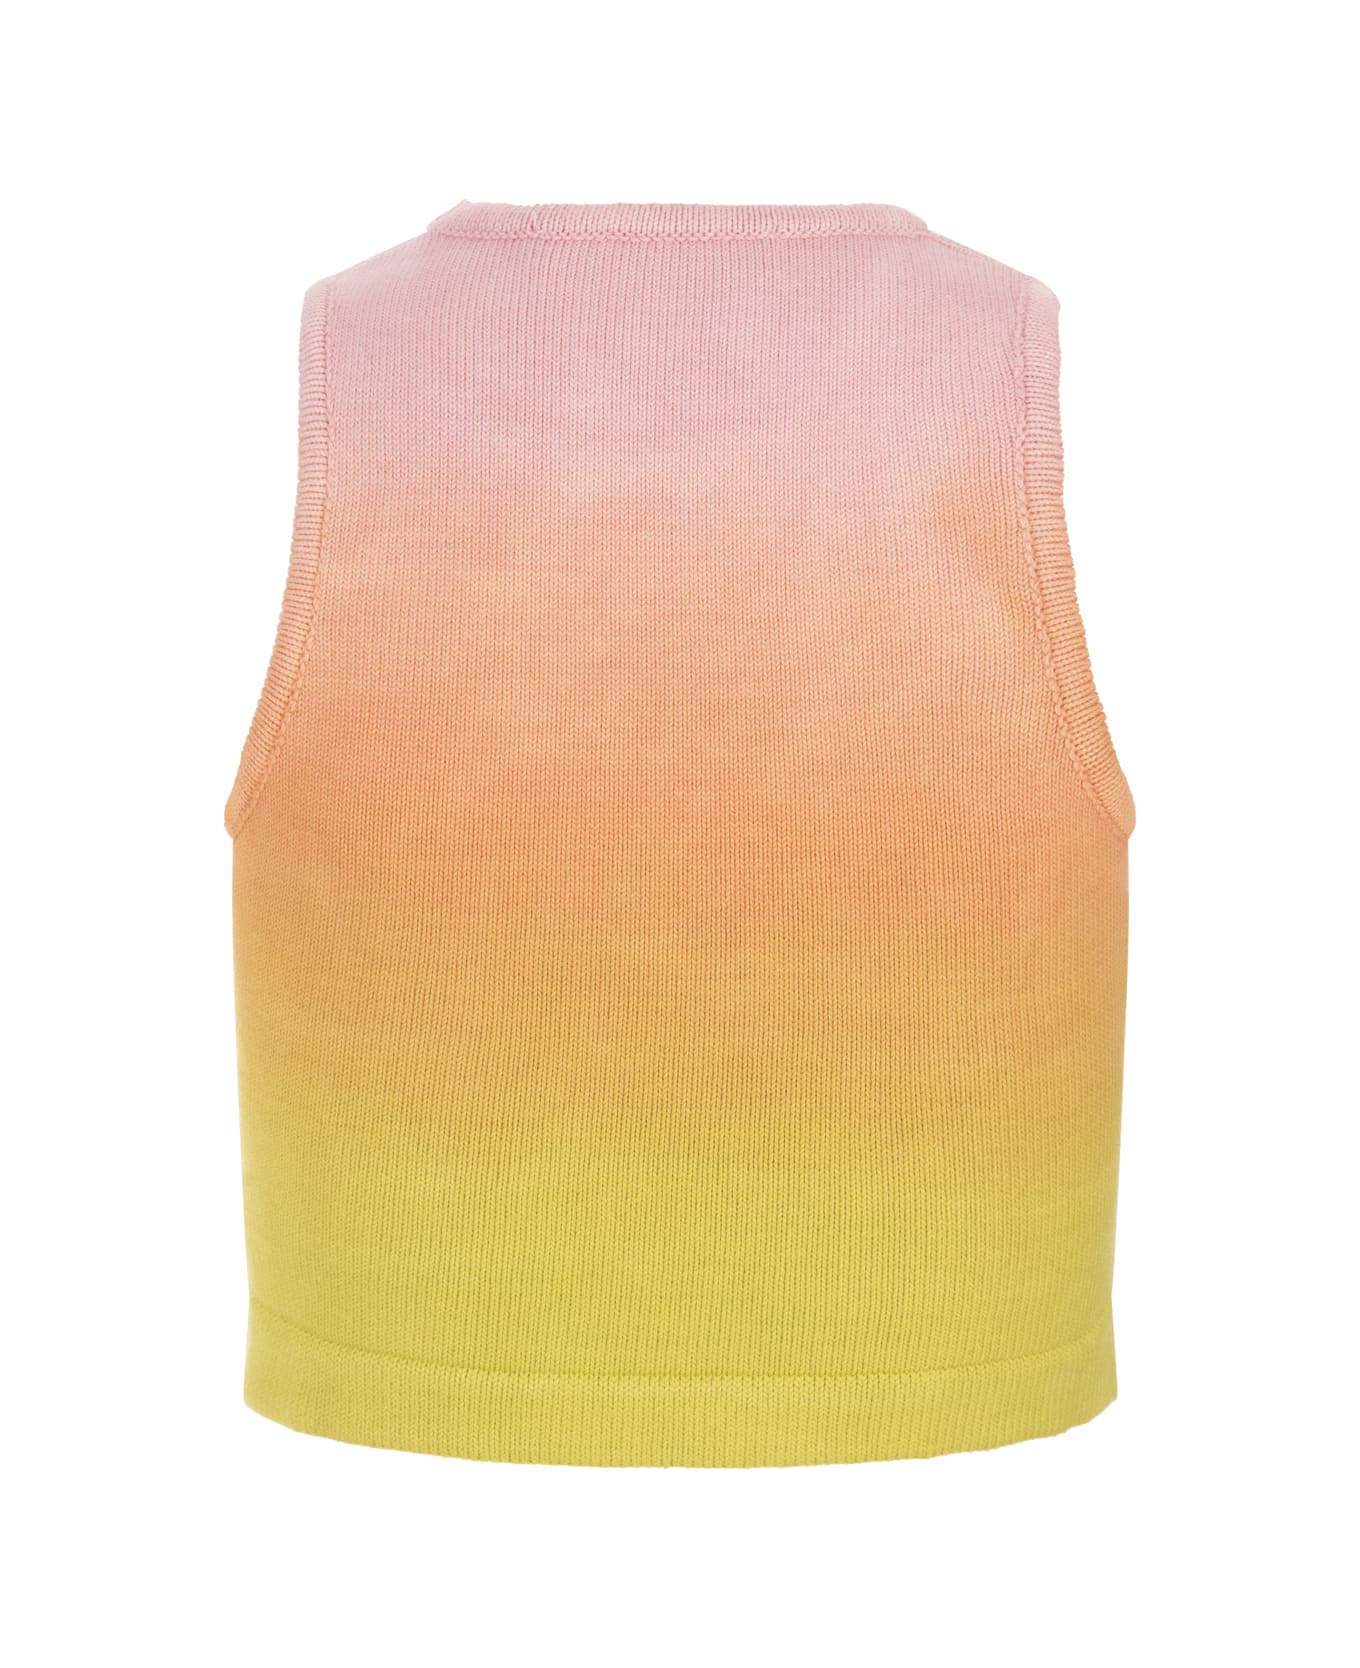 Barrow Multicoloured Knitted Crop Top With Degradé Effect - Multicolour